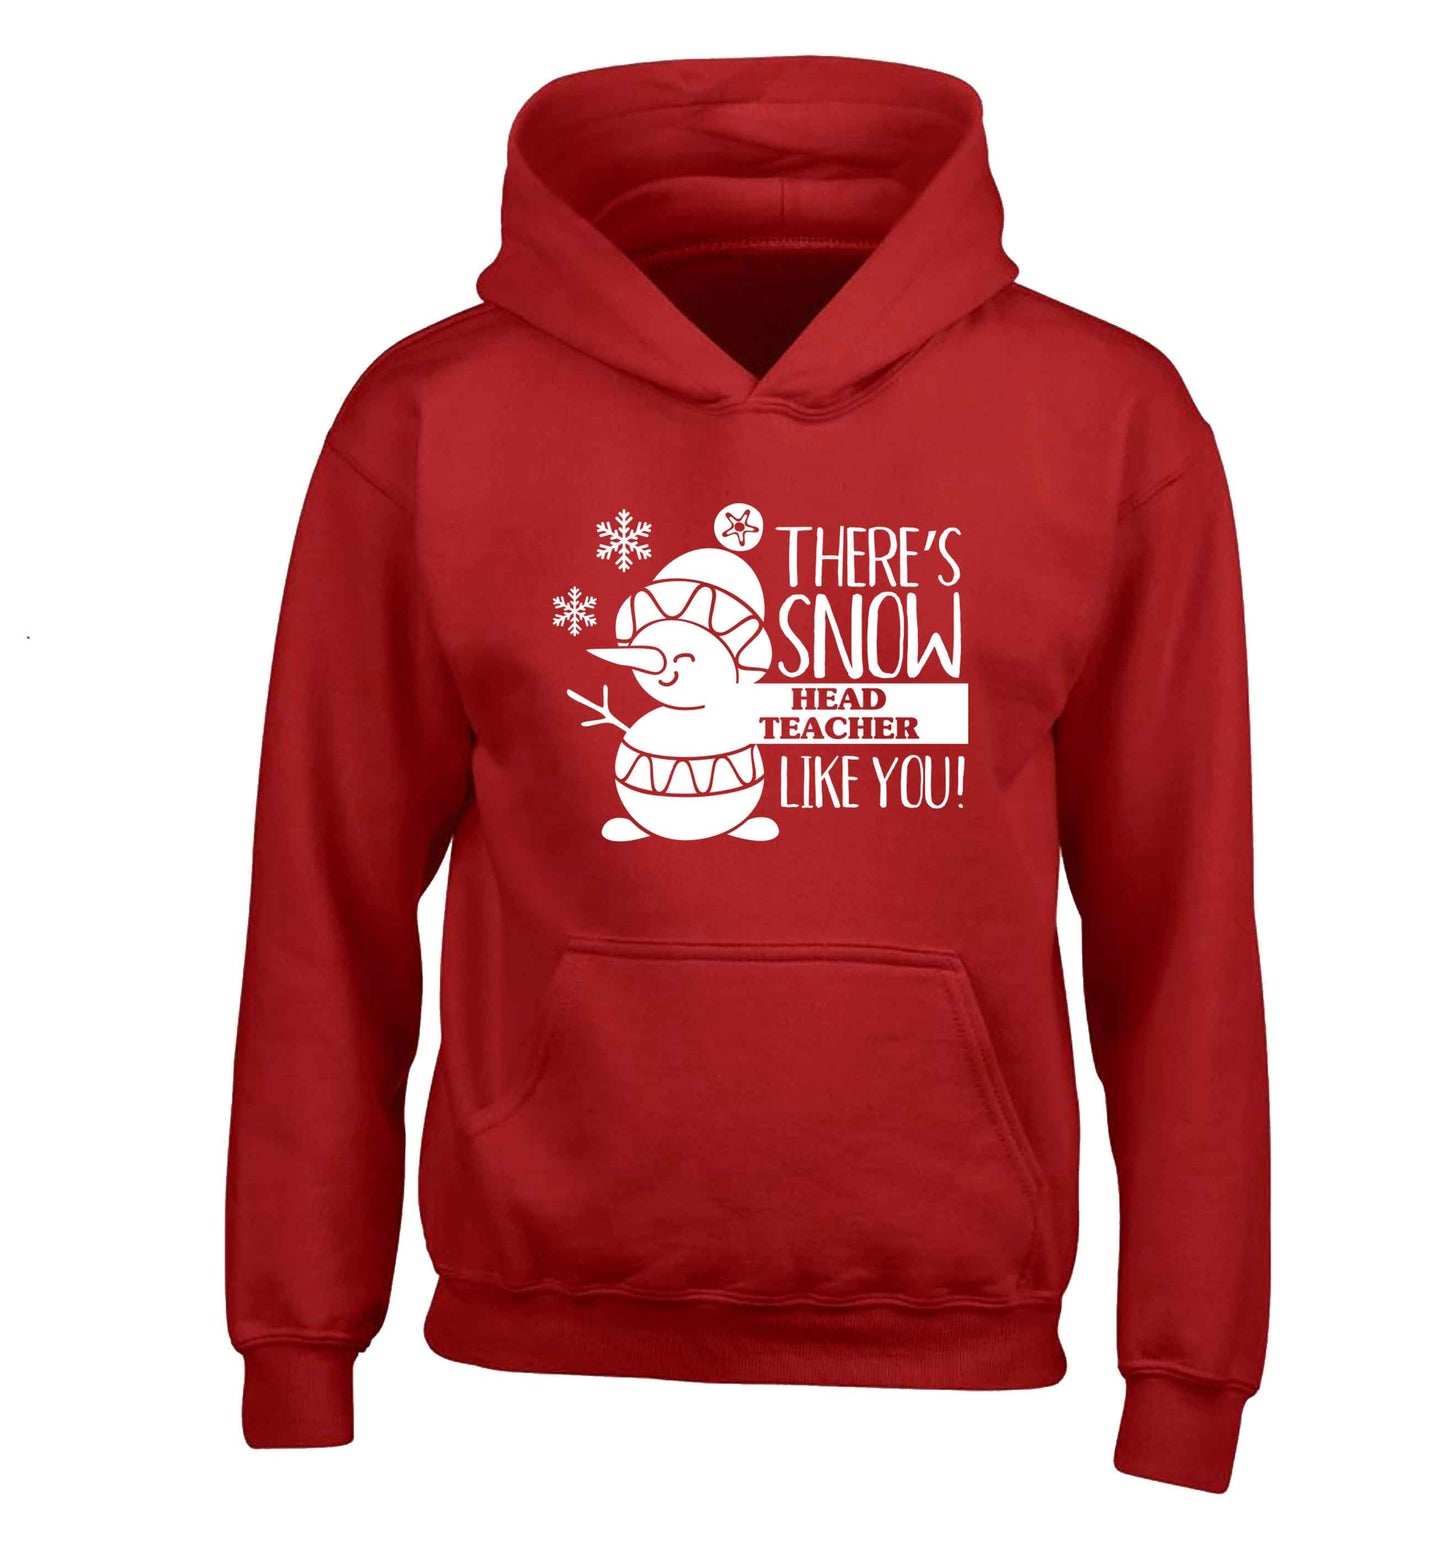 There's snow head teacher like you children's red hoodie 12-13 Years